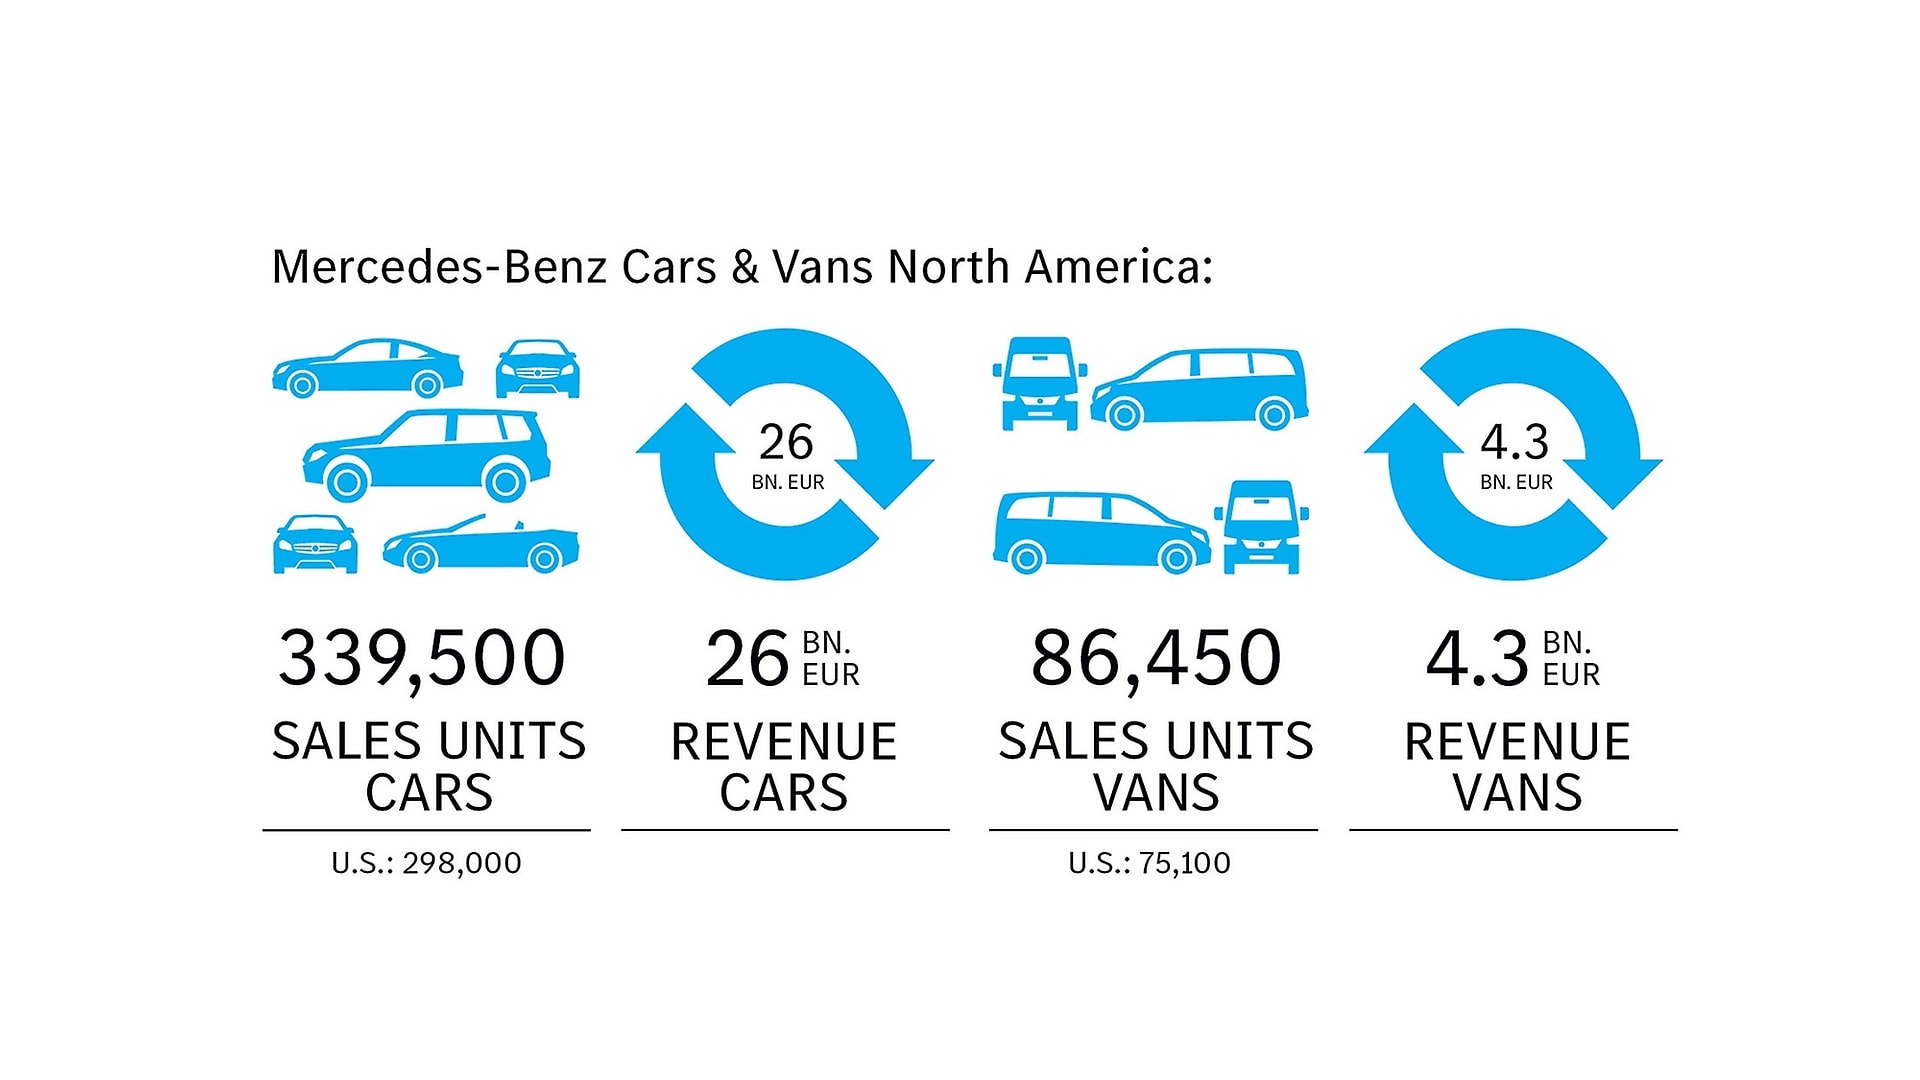 Mercedes-Benz Cars & Vans²; 3 production locations in North America